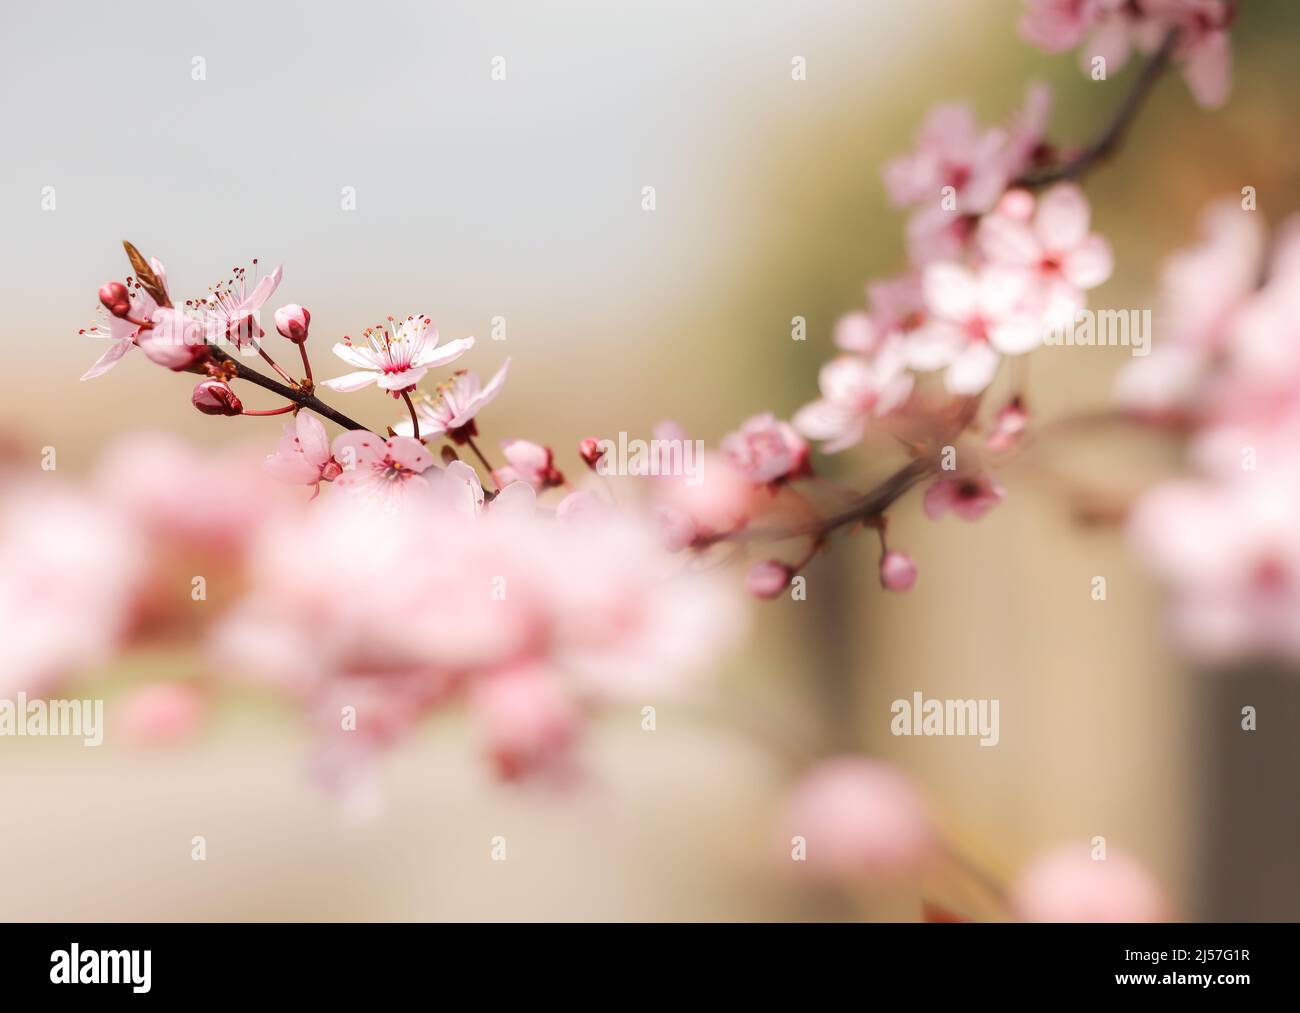 Delicate Prunus Cerasifera Outside in the Garden. Shallow Depth of Field of Beautiful Petals of Cherry Plum also called Myrobalan Plum in Spring. Stock Photo